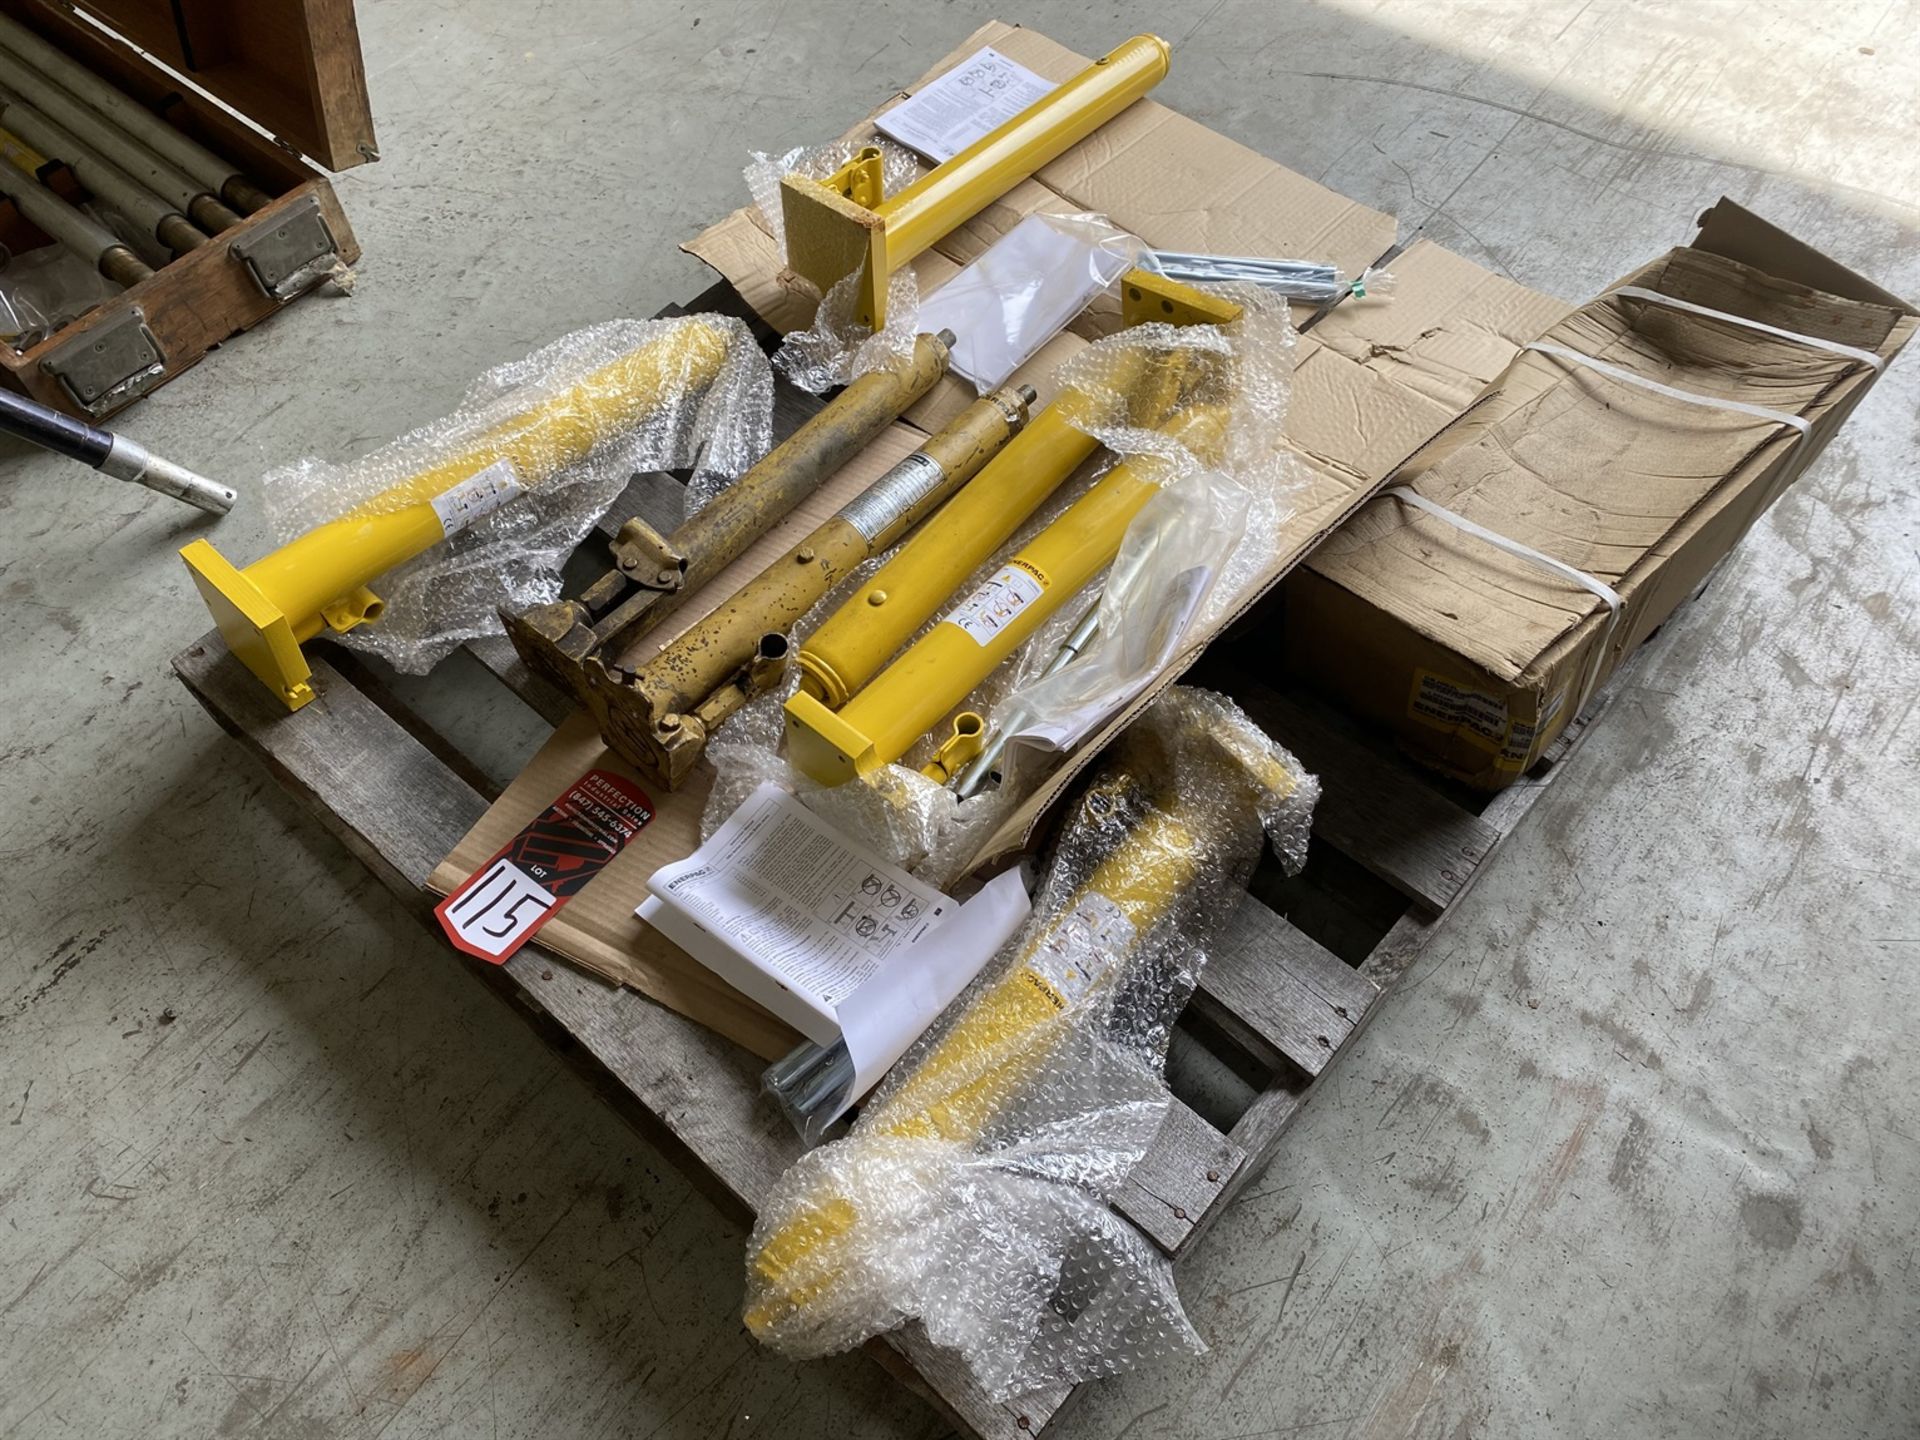 Pallet of New and Used 1.5-2 Ton ENERPAC Hydraulic Jacks